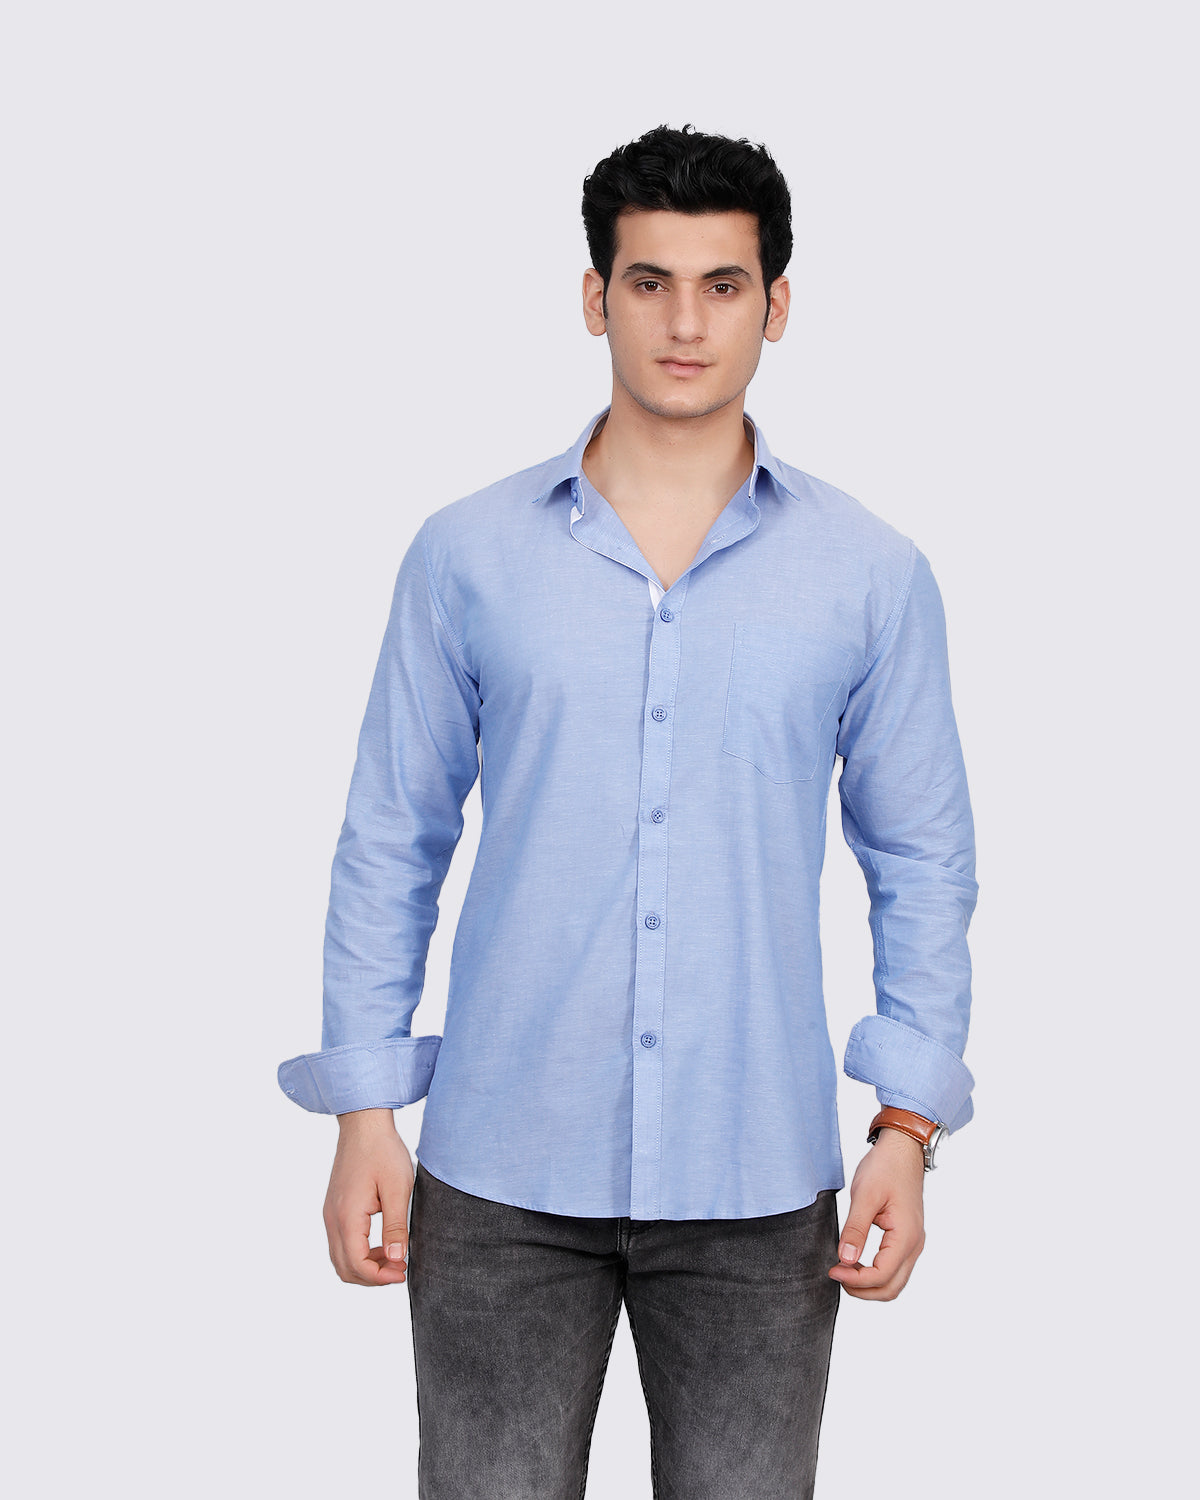 Textured Slim Fit Shirt with Patch Pocket - Blue